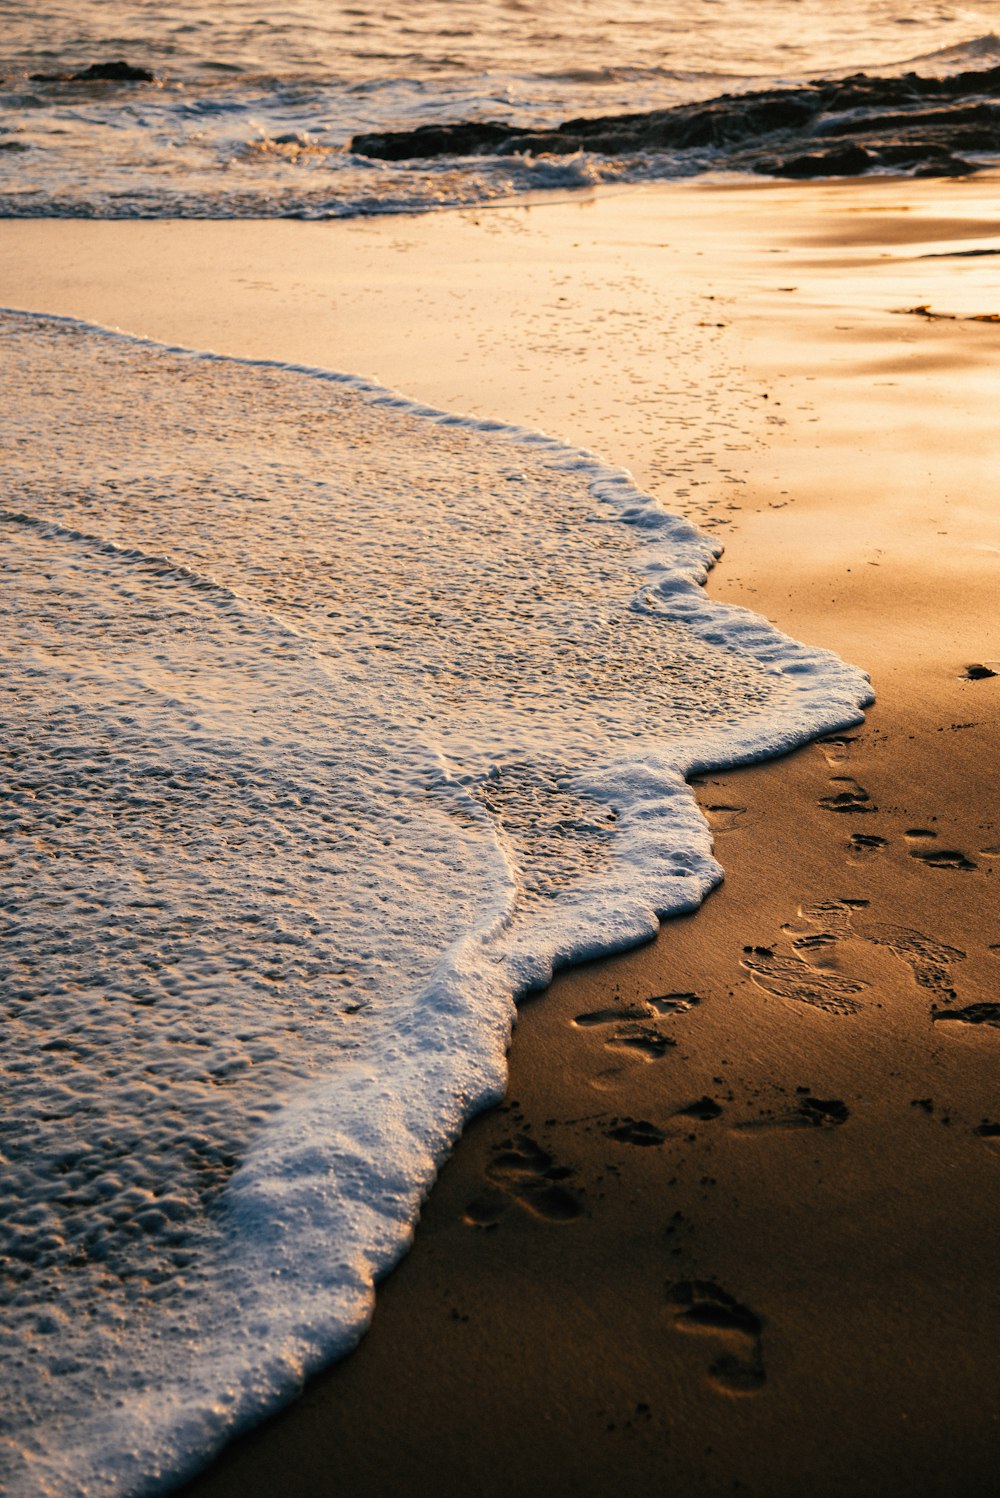 footprints in the sand of a beach at sunset